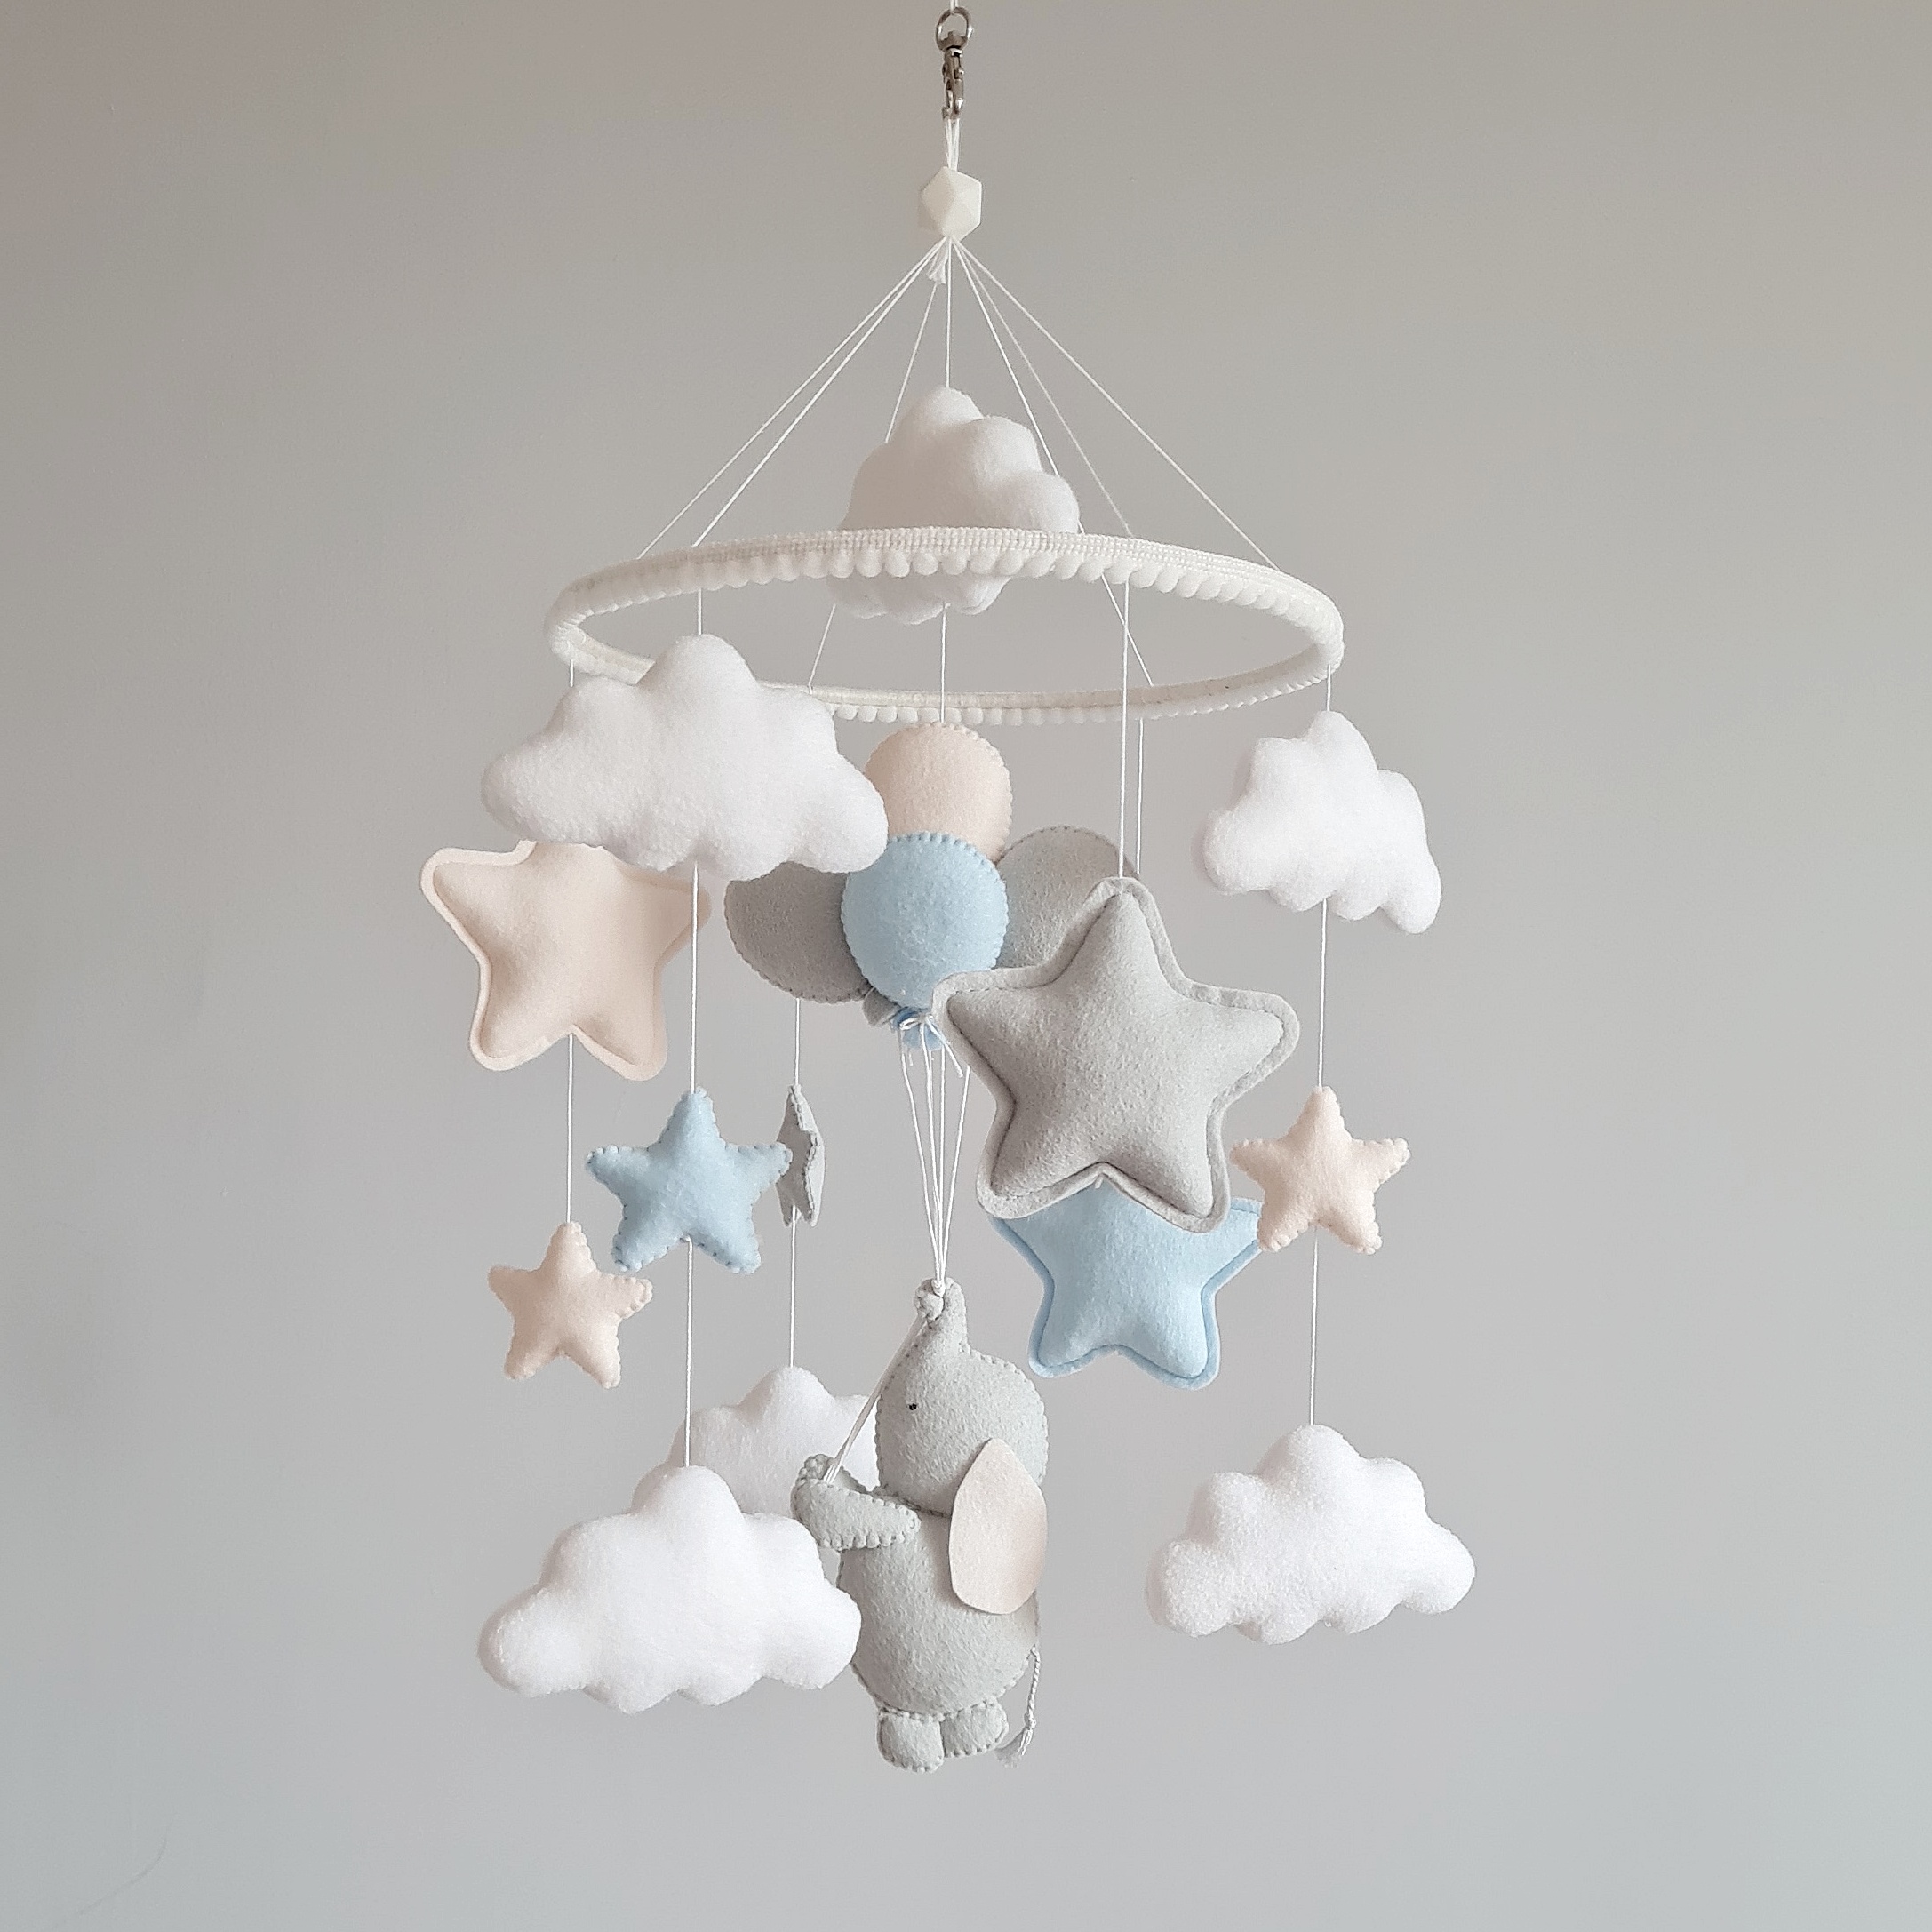 Perpetual Neuropathy fare Elephant baby mobile, Stars and Clouds baby decor, Crib toys